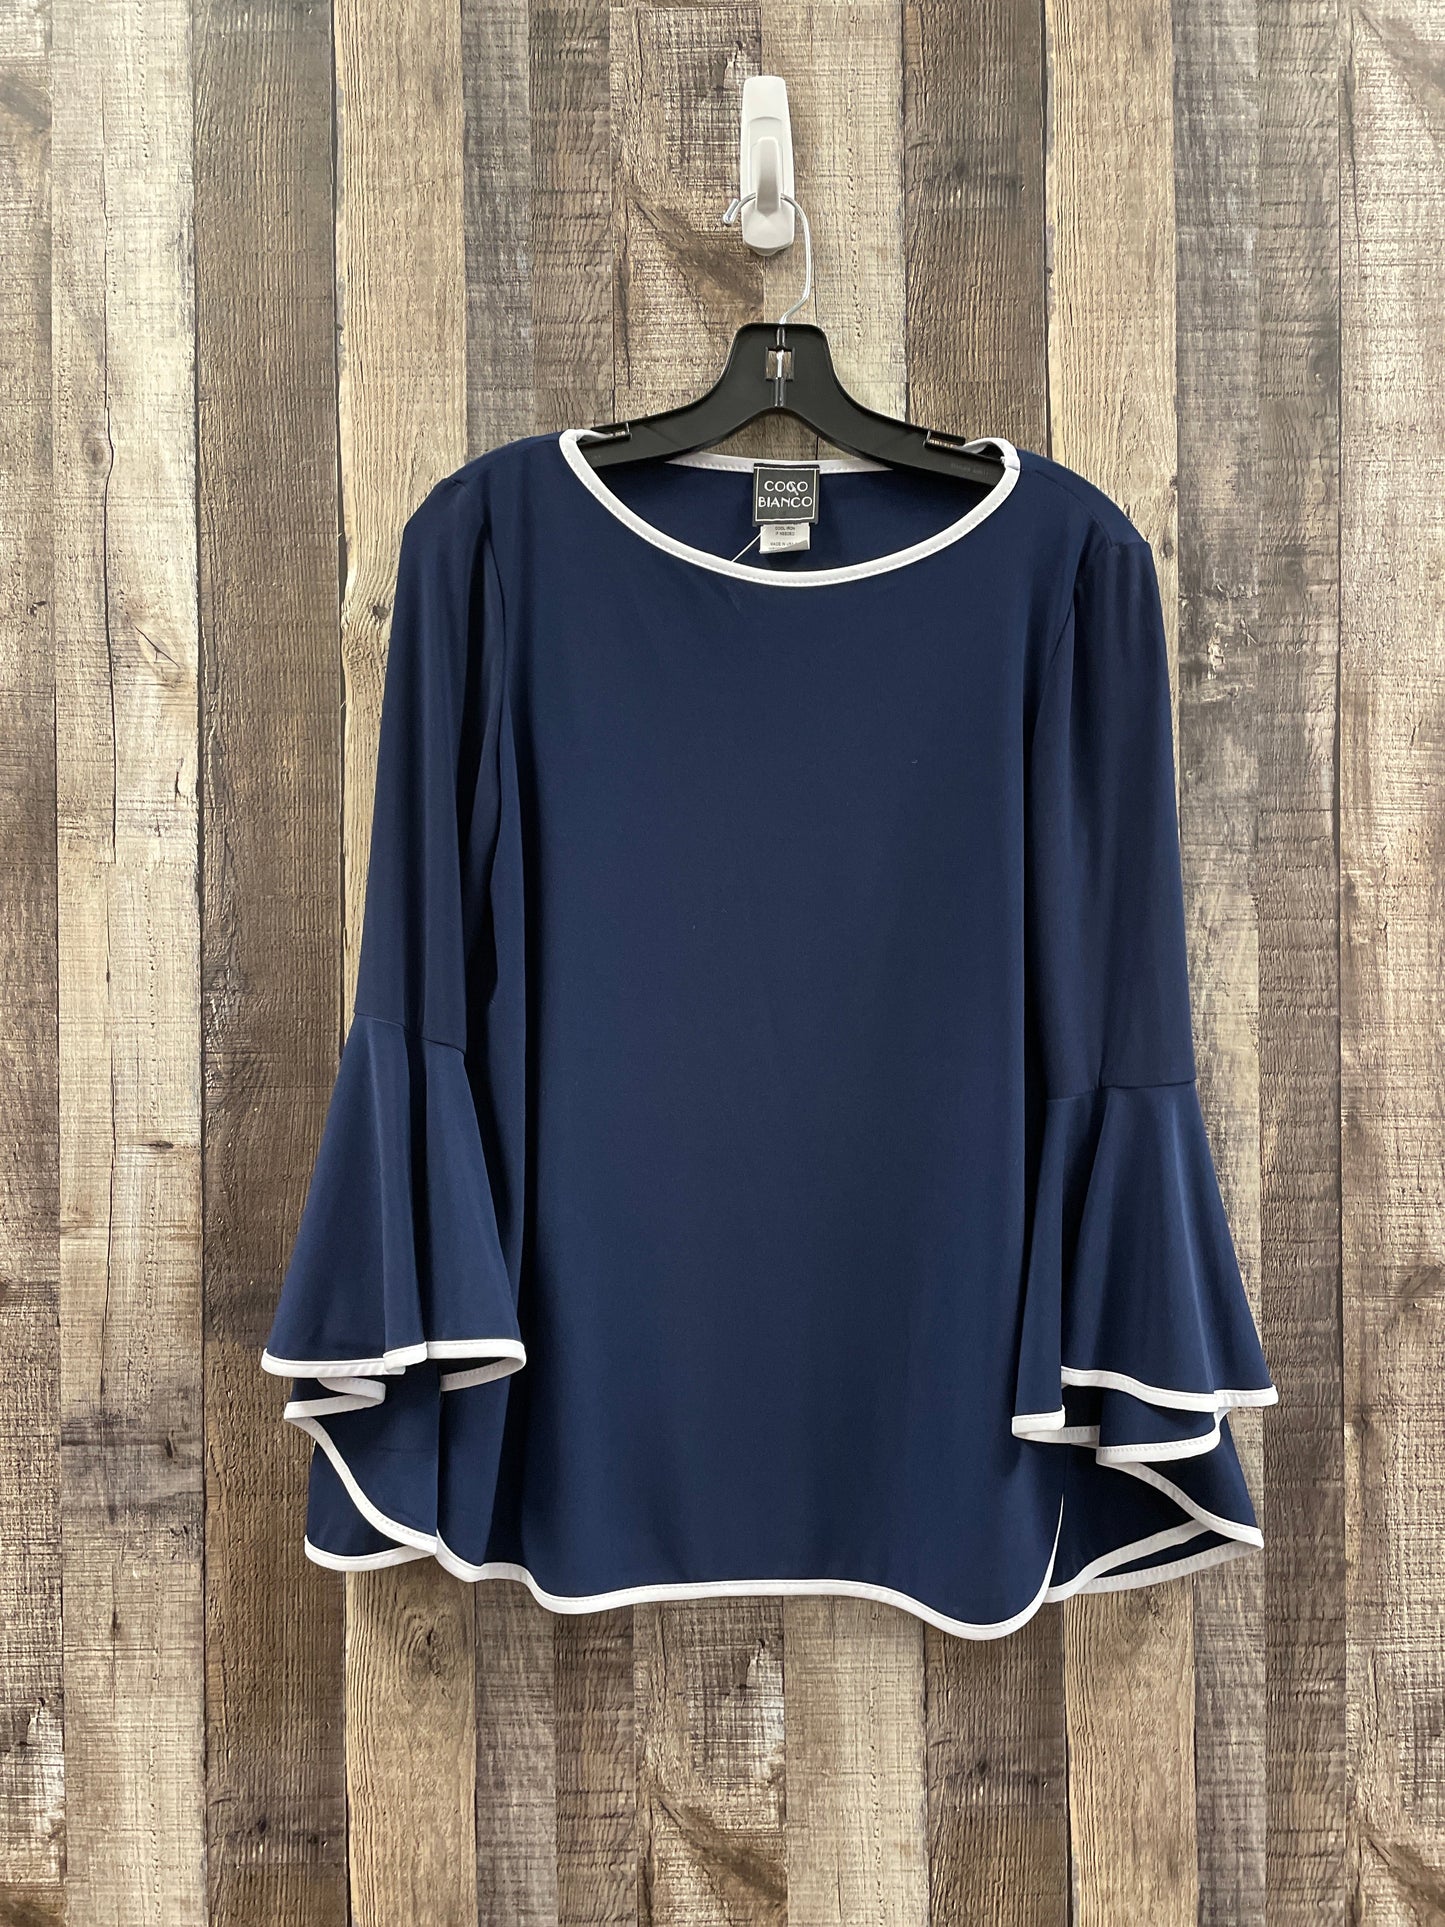 Blue Top Long Sleeve Cme, Size M